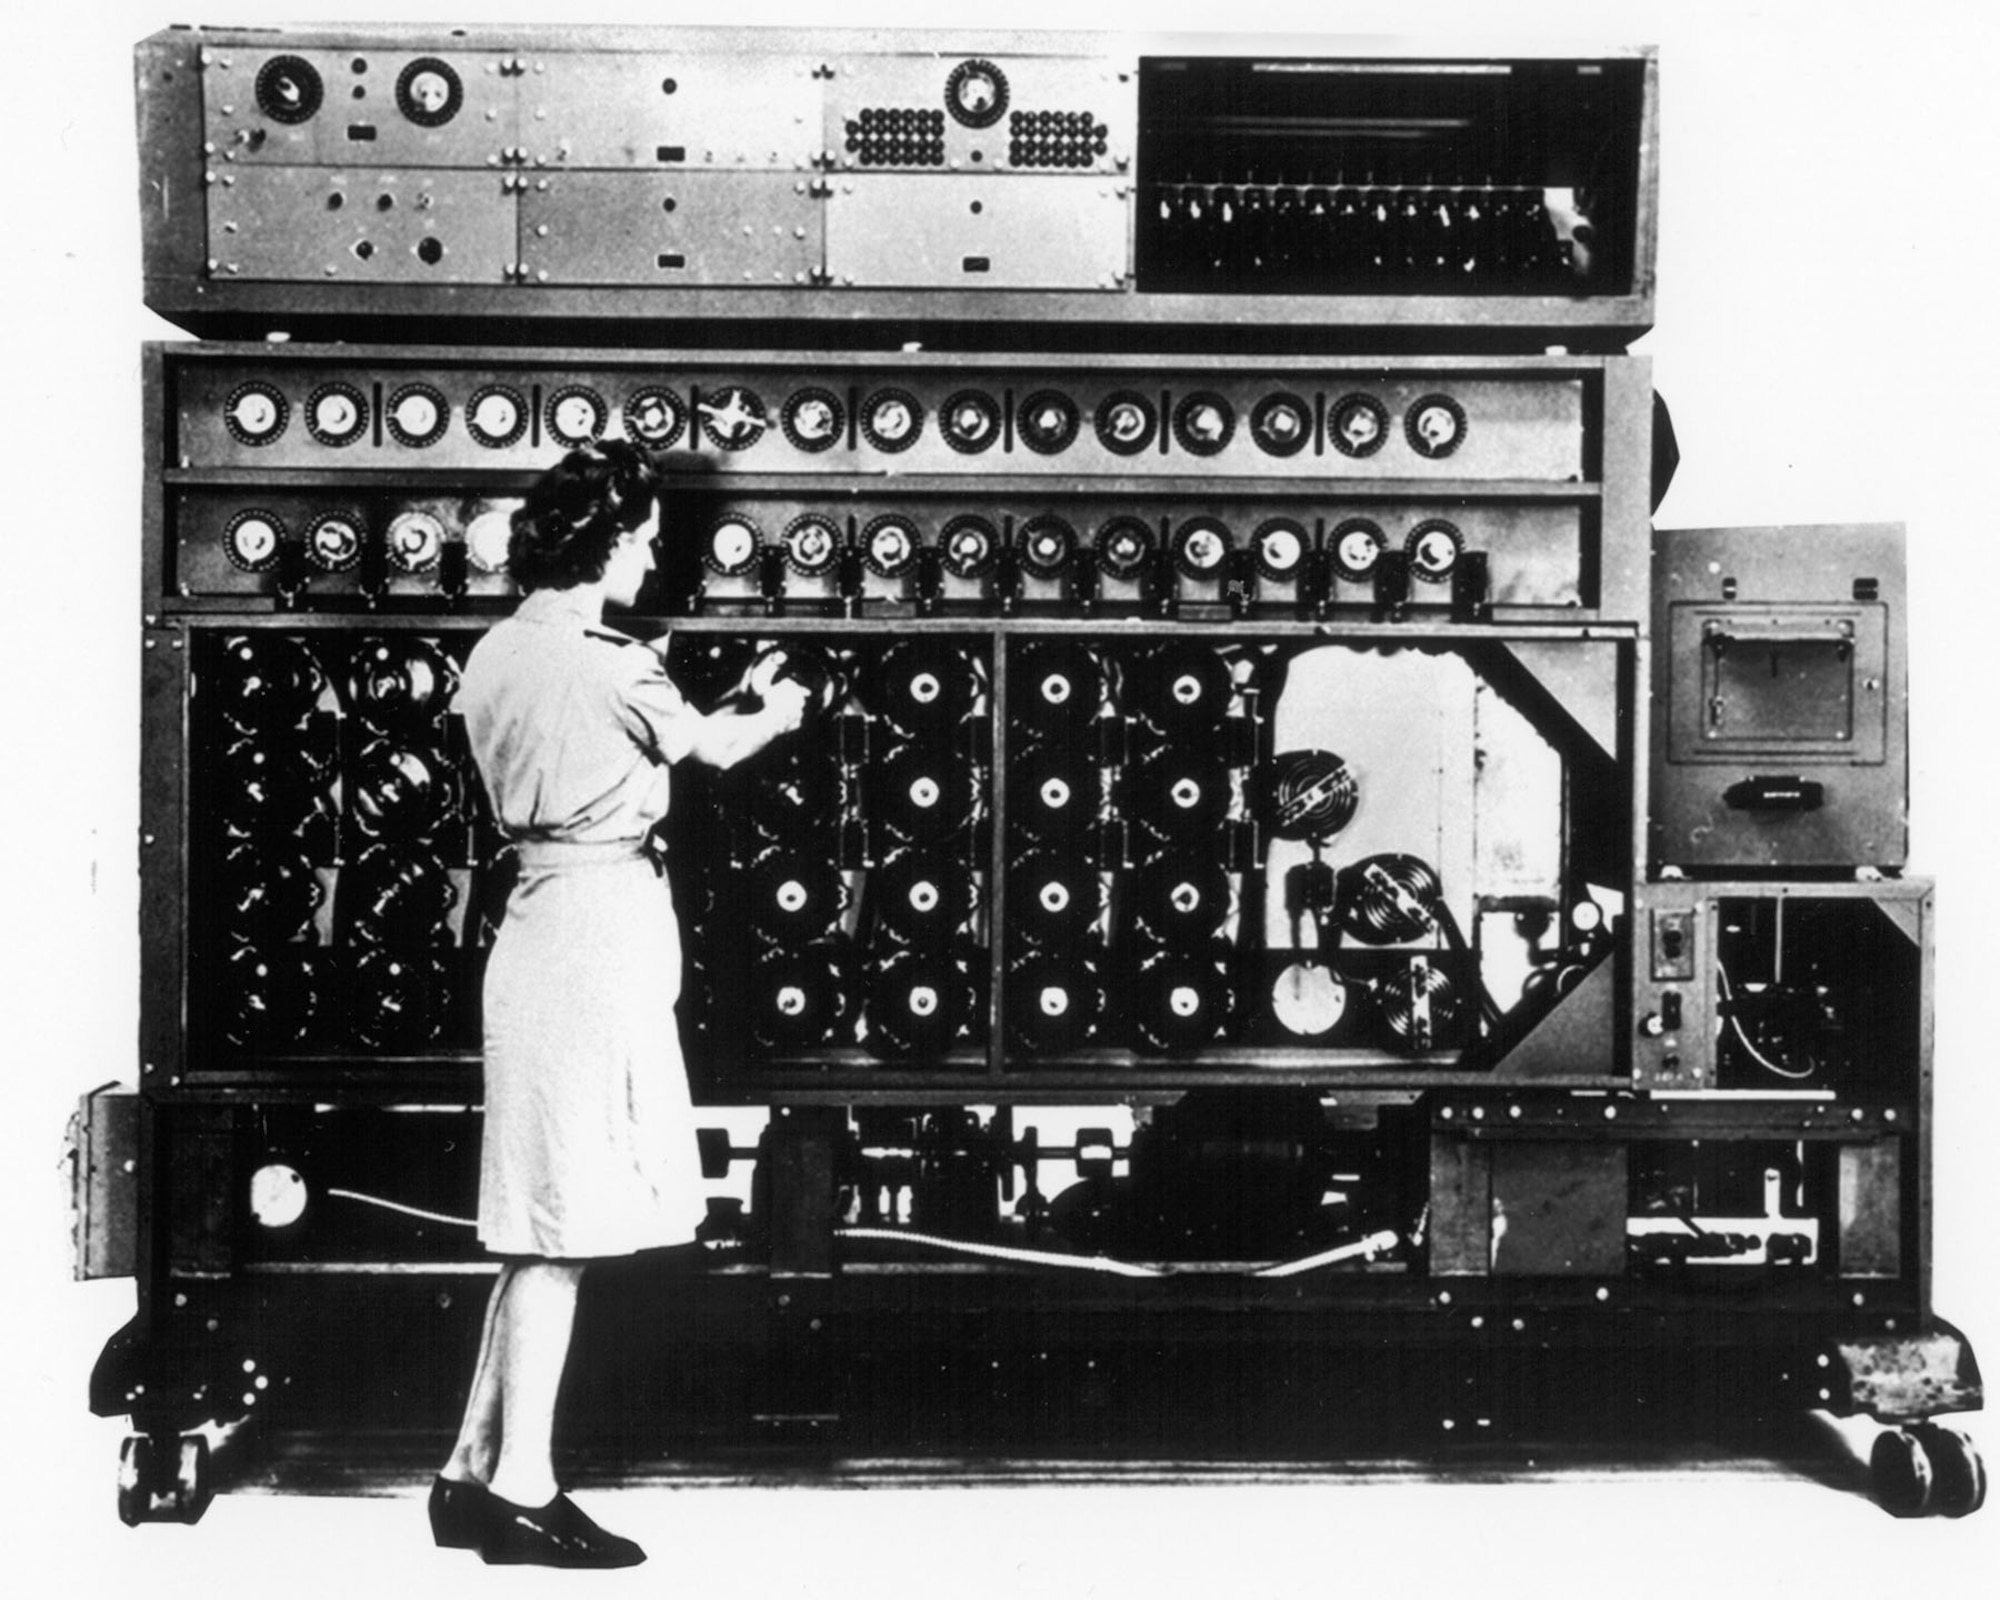 An Enigma decryption machine, called a "bombe." This machine, made by National Cash Register of Dayton, Ohio, eliminated all possible encryptions from intercepted messages until it arrived at the correct solution. (U.S. Air Force photo)